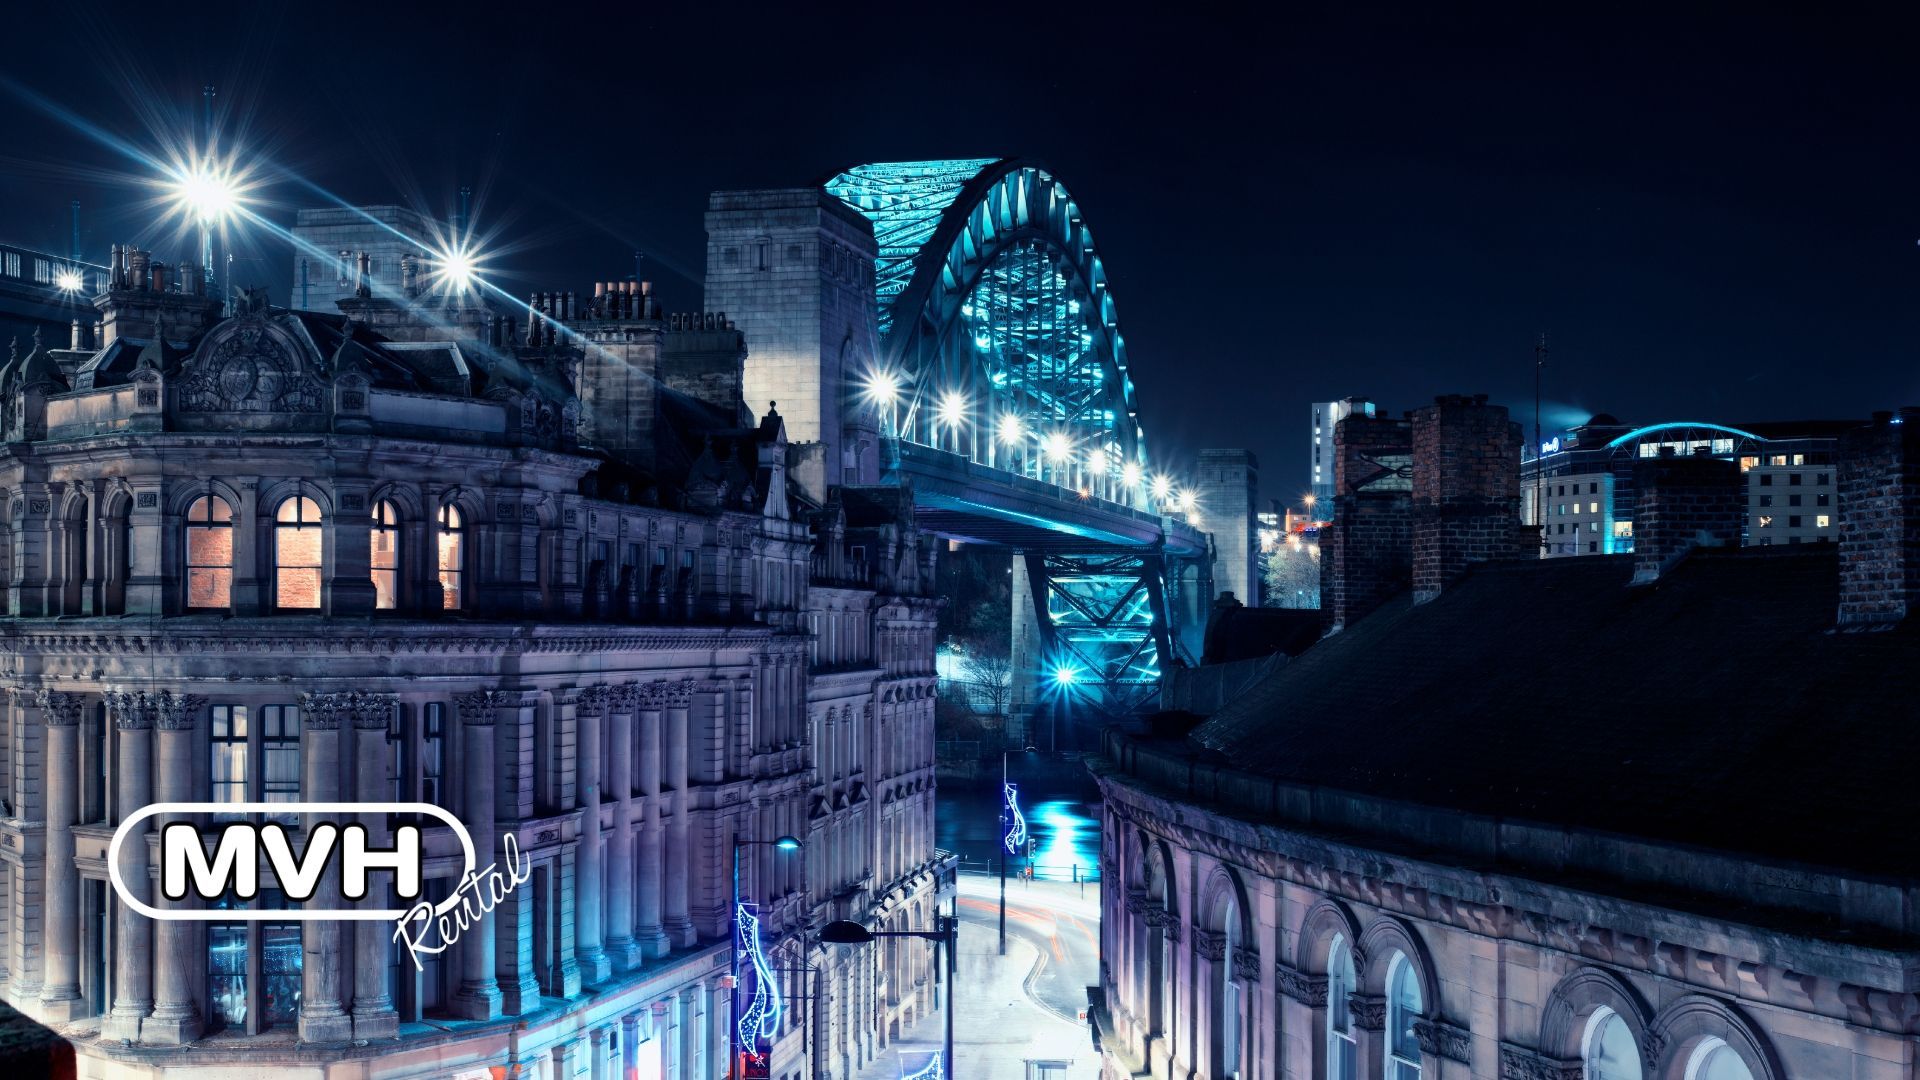 Long overshadowed by its big-sister city across the river, Tyneside's best-kept secret is finally stepping into the spotlight – and it's well worth a visit!